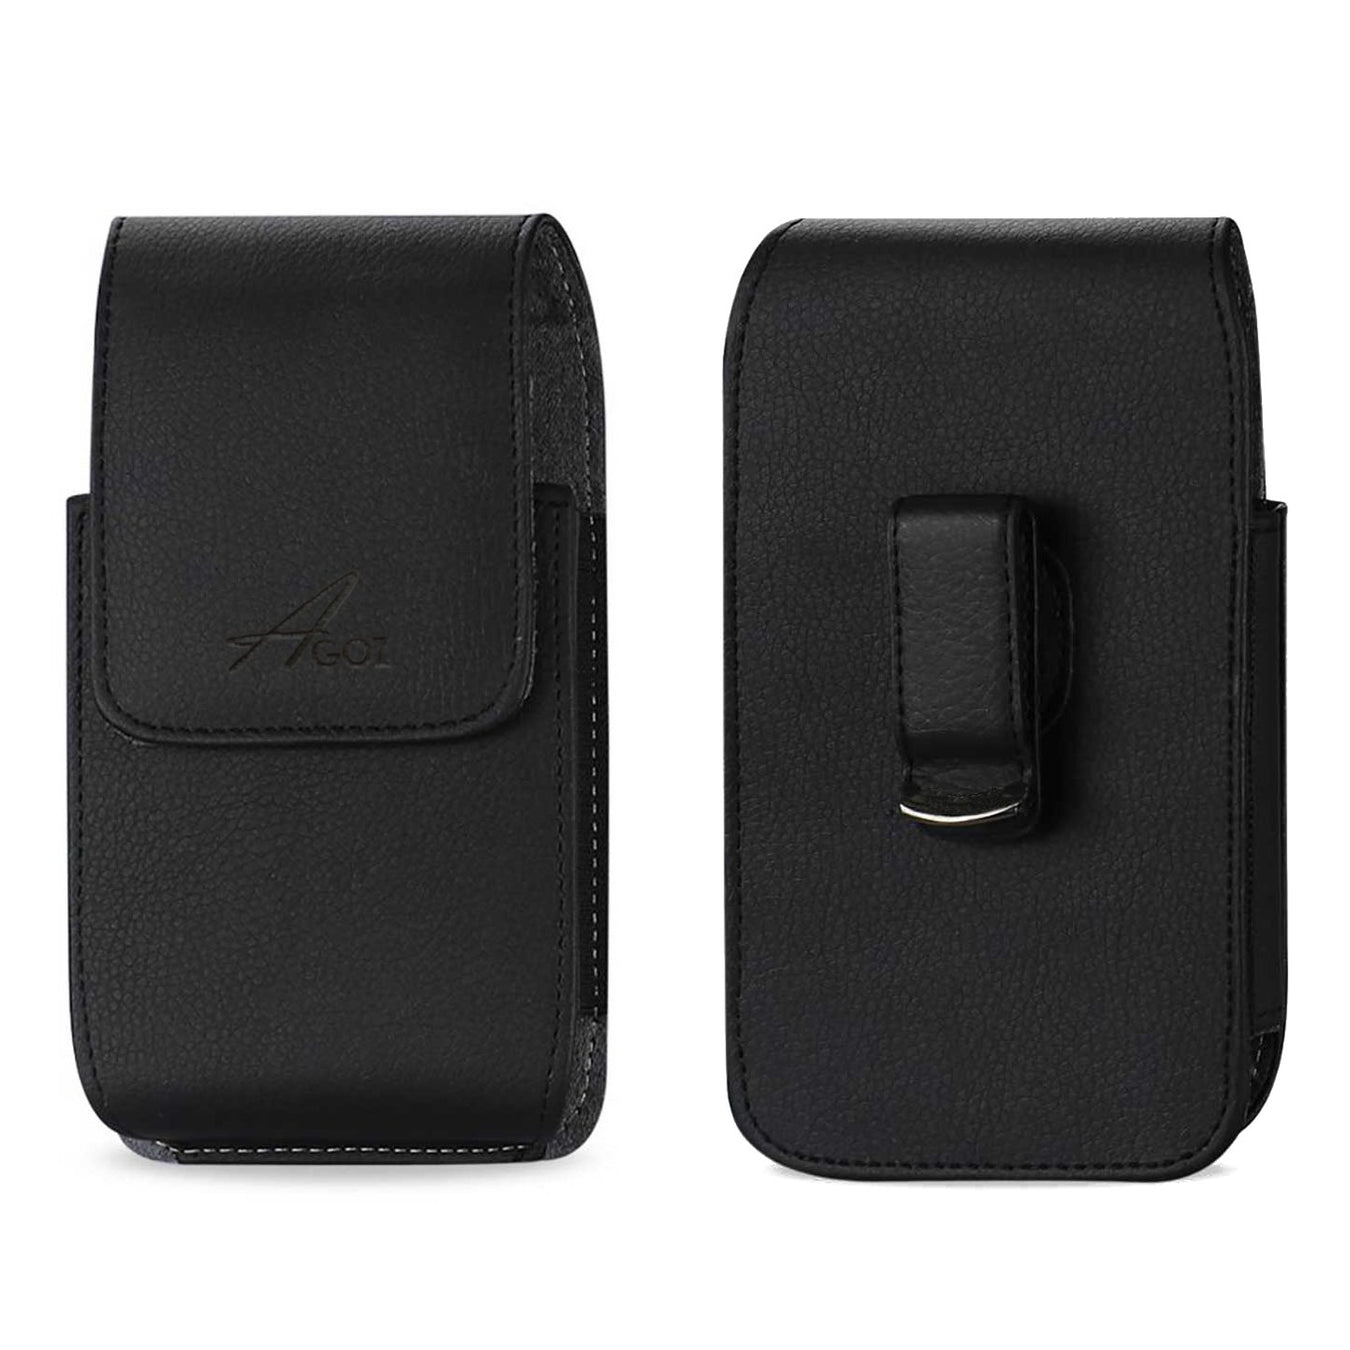 Alcatel Go Flip Leather Canvas Rugged Case Holster Pouch